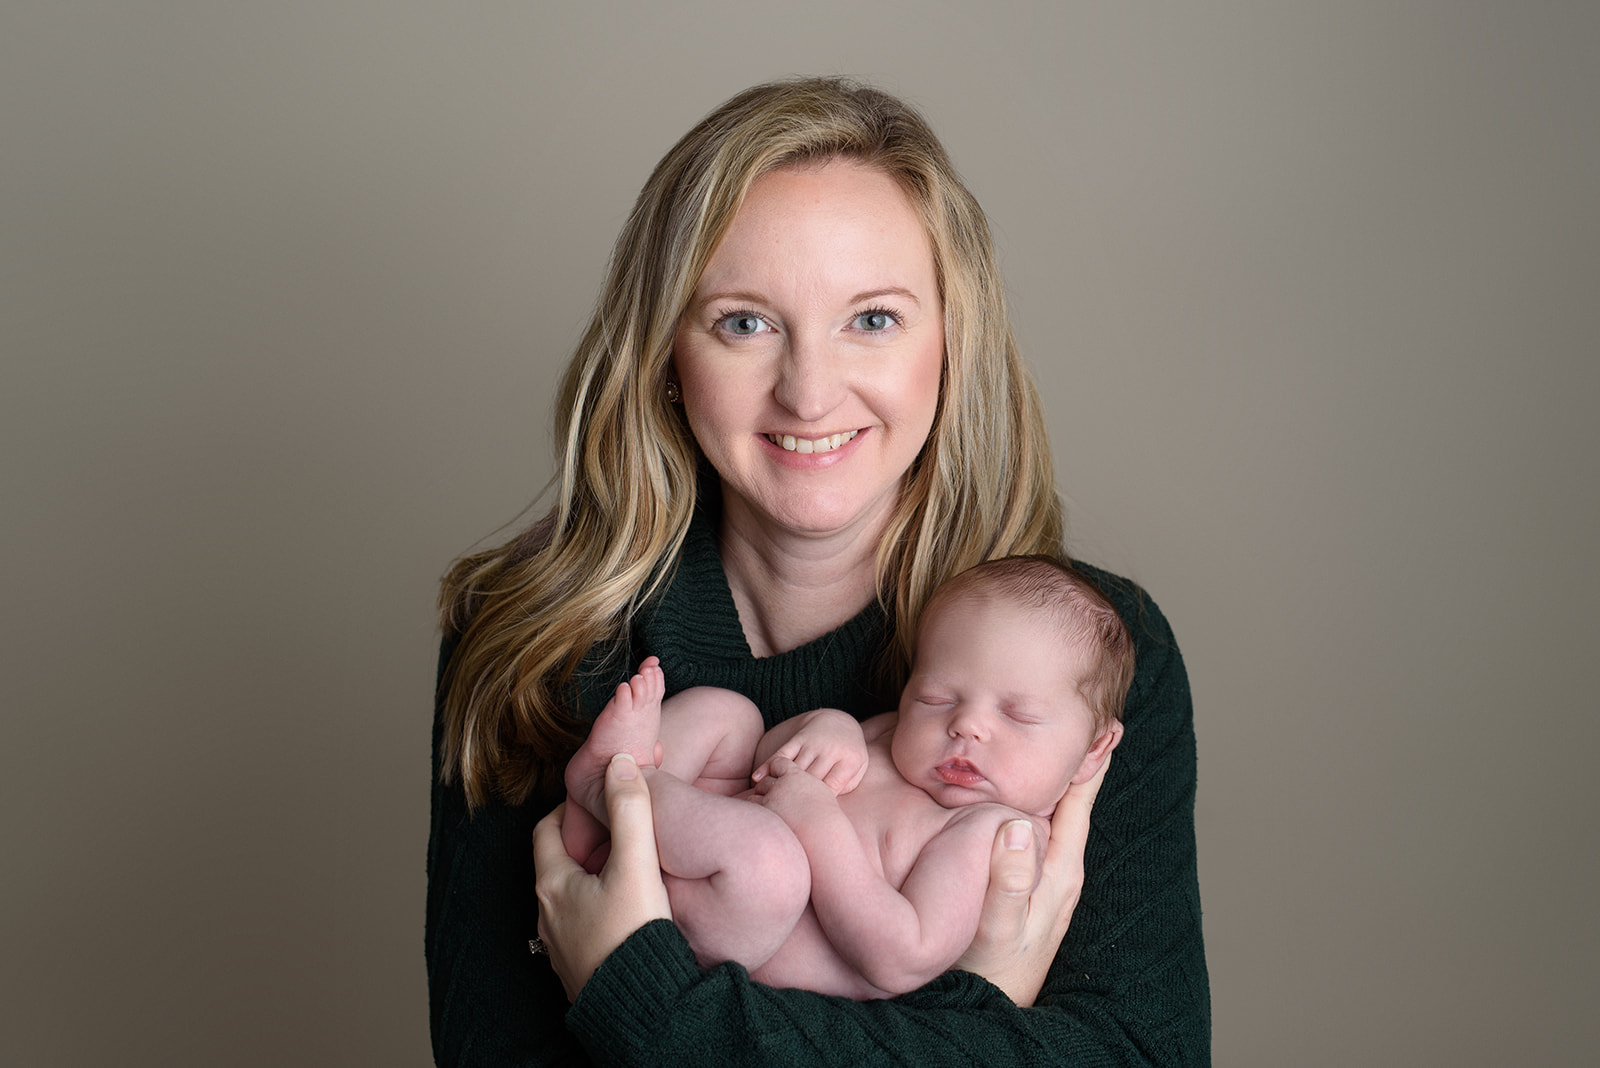 A new mom cradles her newborn baby during a photography session with Rachel Mummert Photography